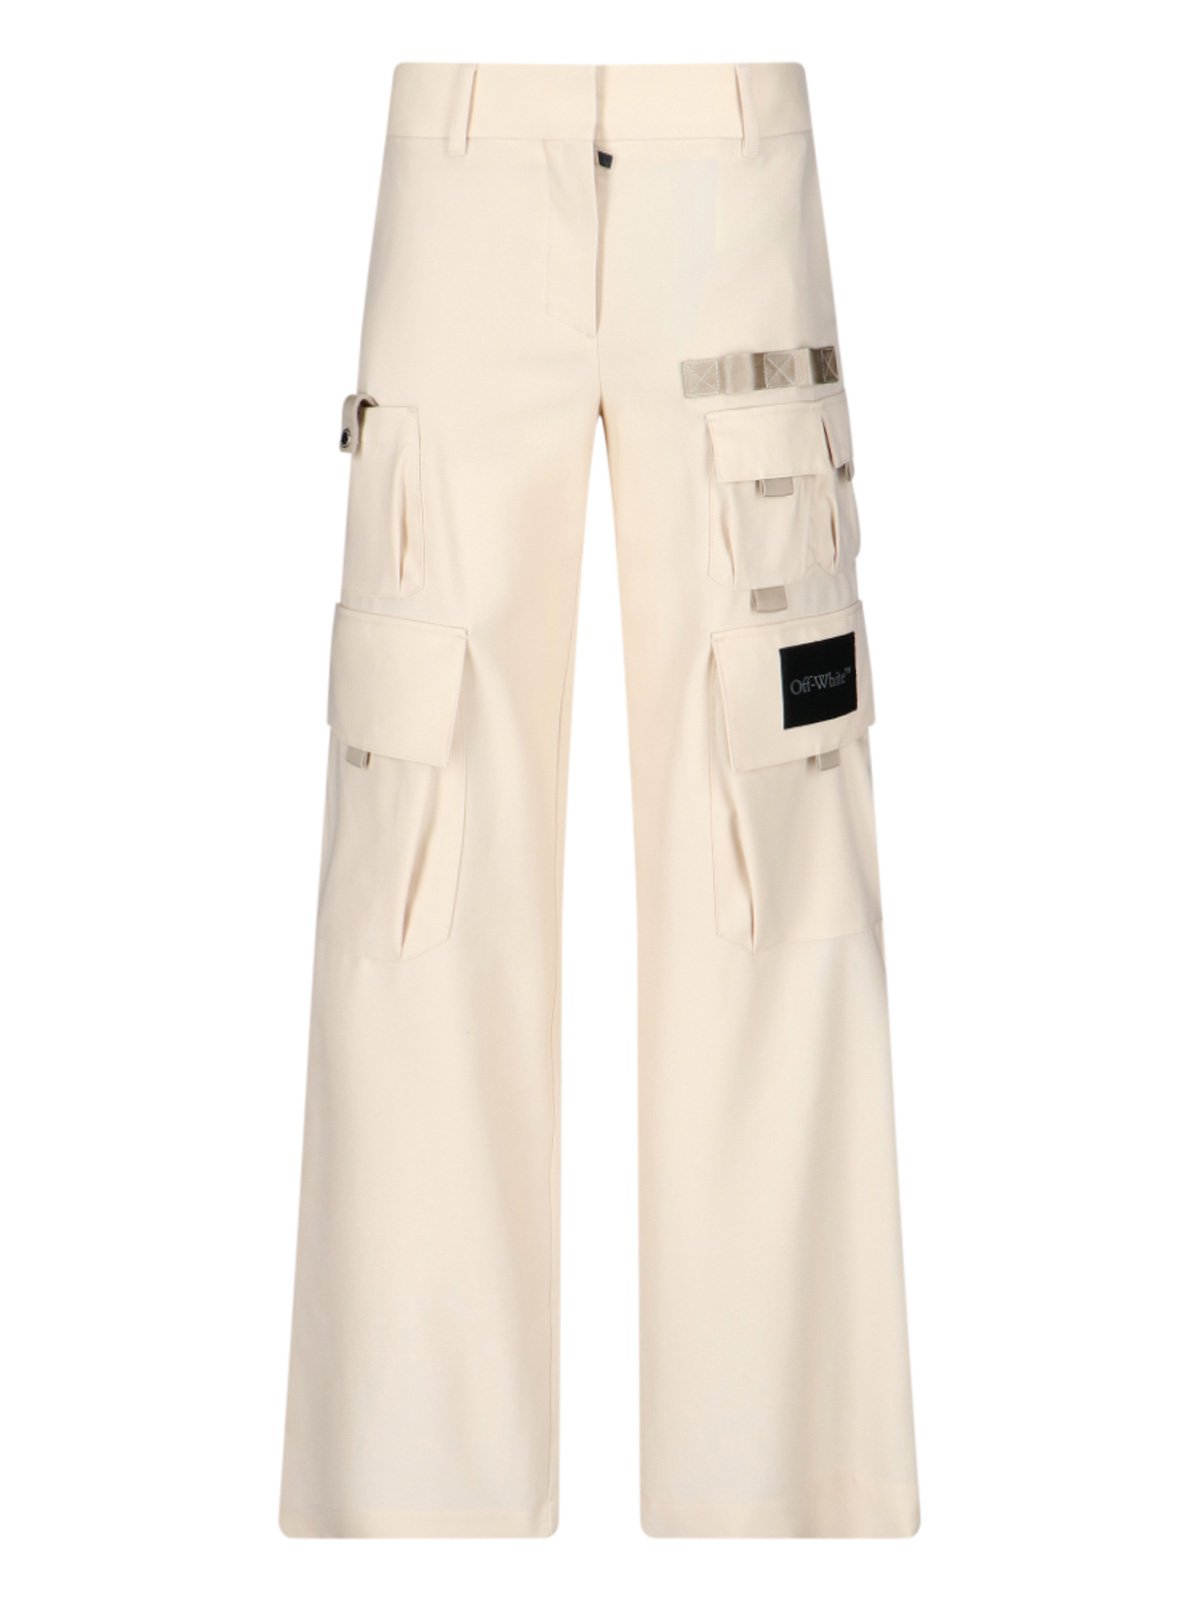 Off-White Logo Detailed Wide Leg Trousers